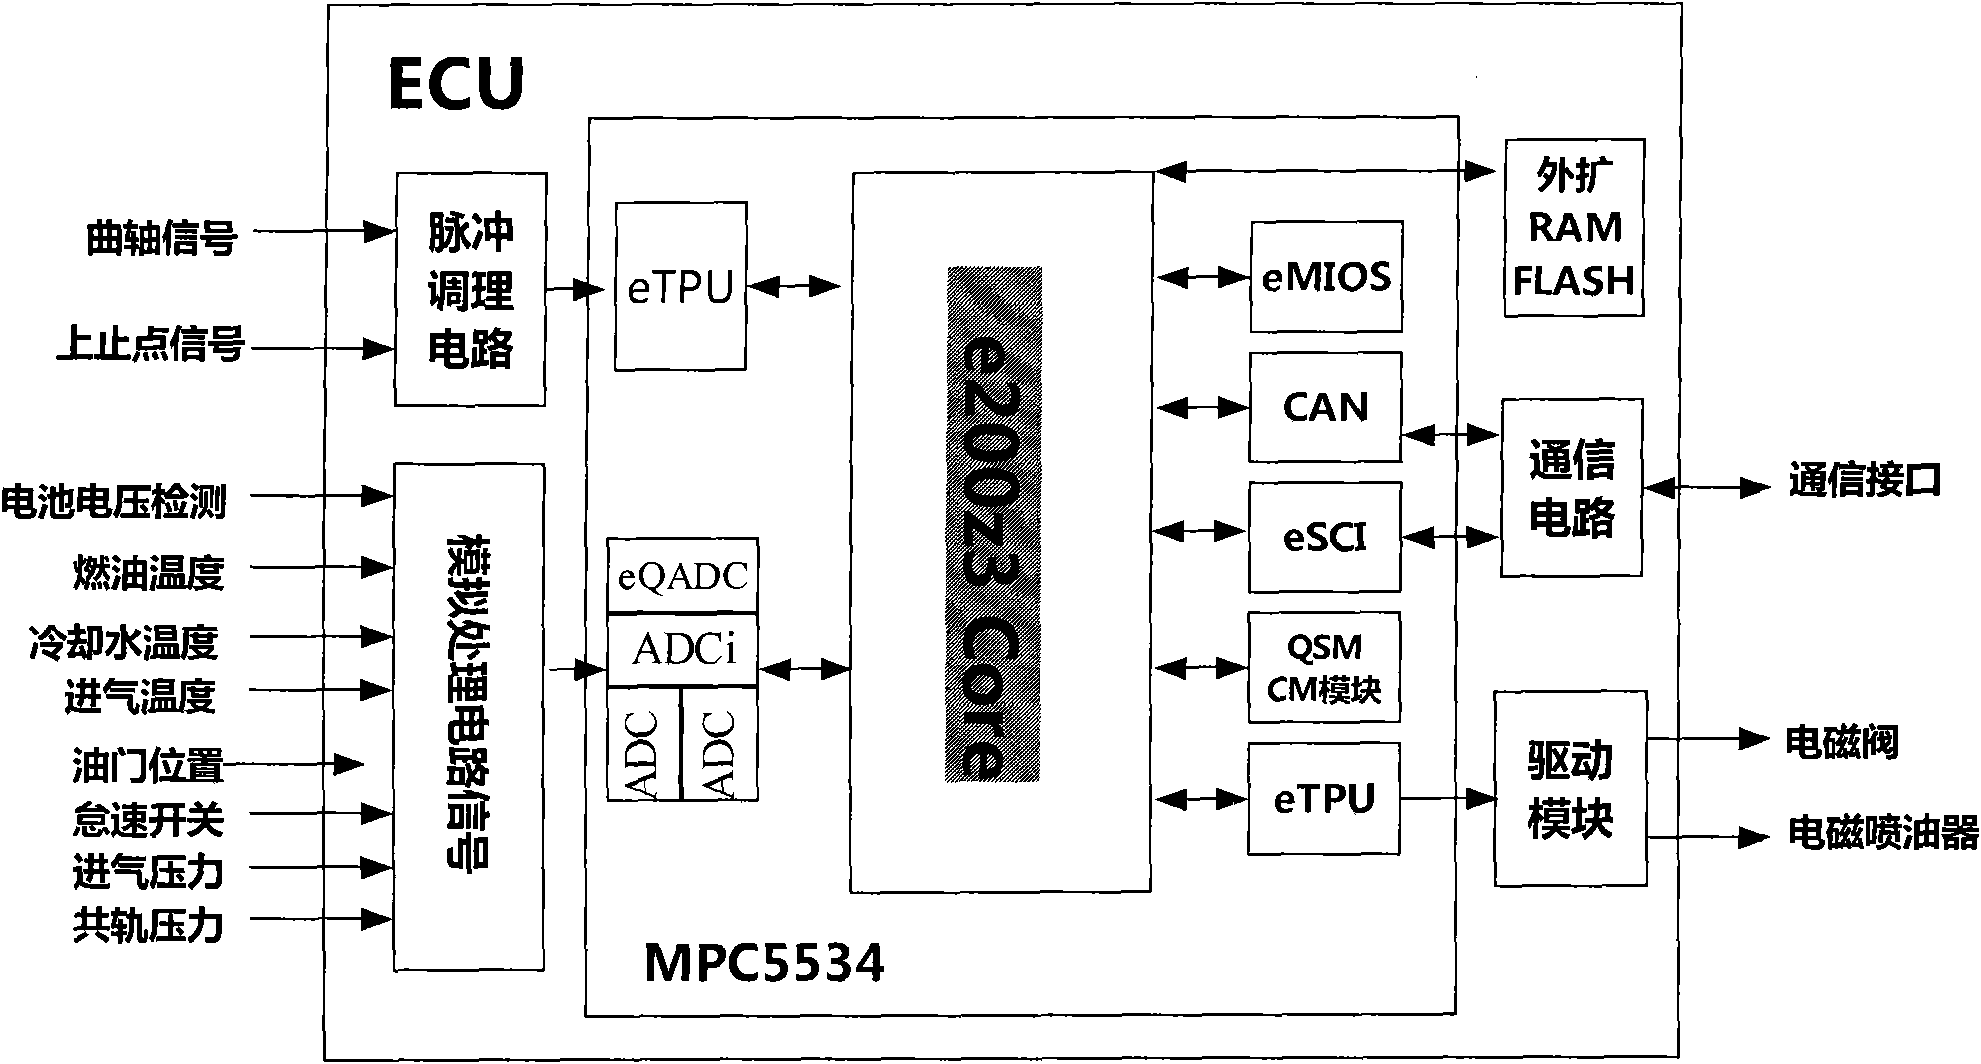 Electronic control unit (ECU) of electromagnetic-type high-pressure common-rail injection system for vehicle diesel engine